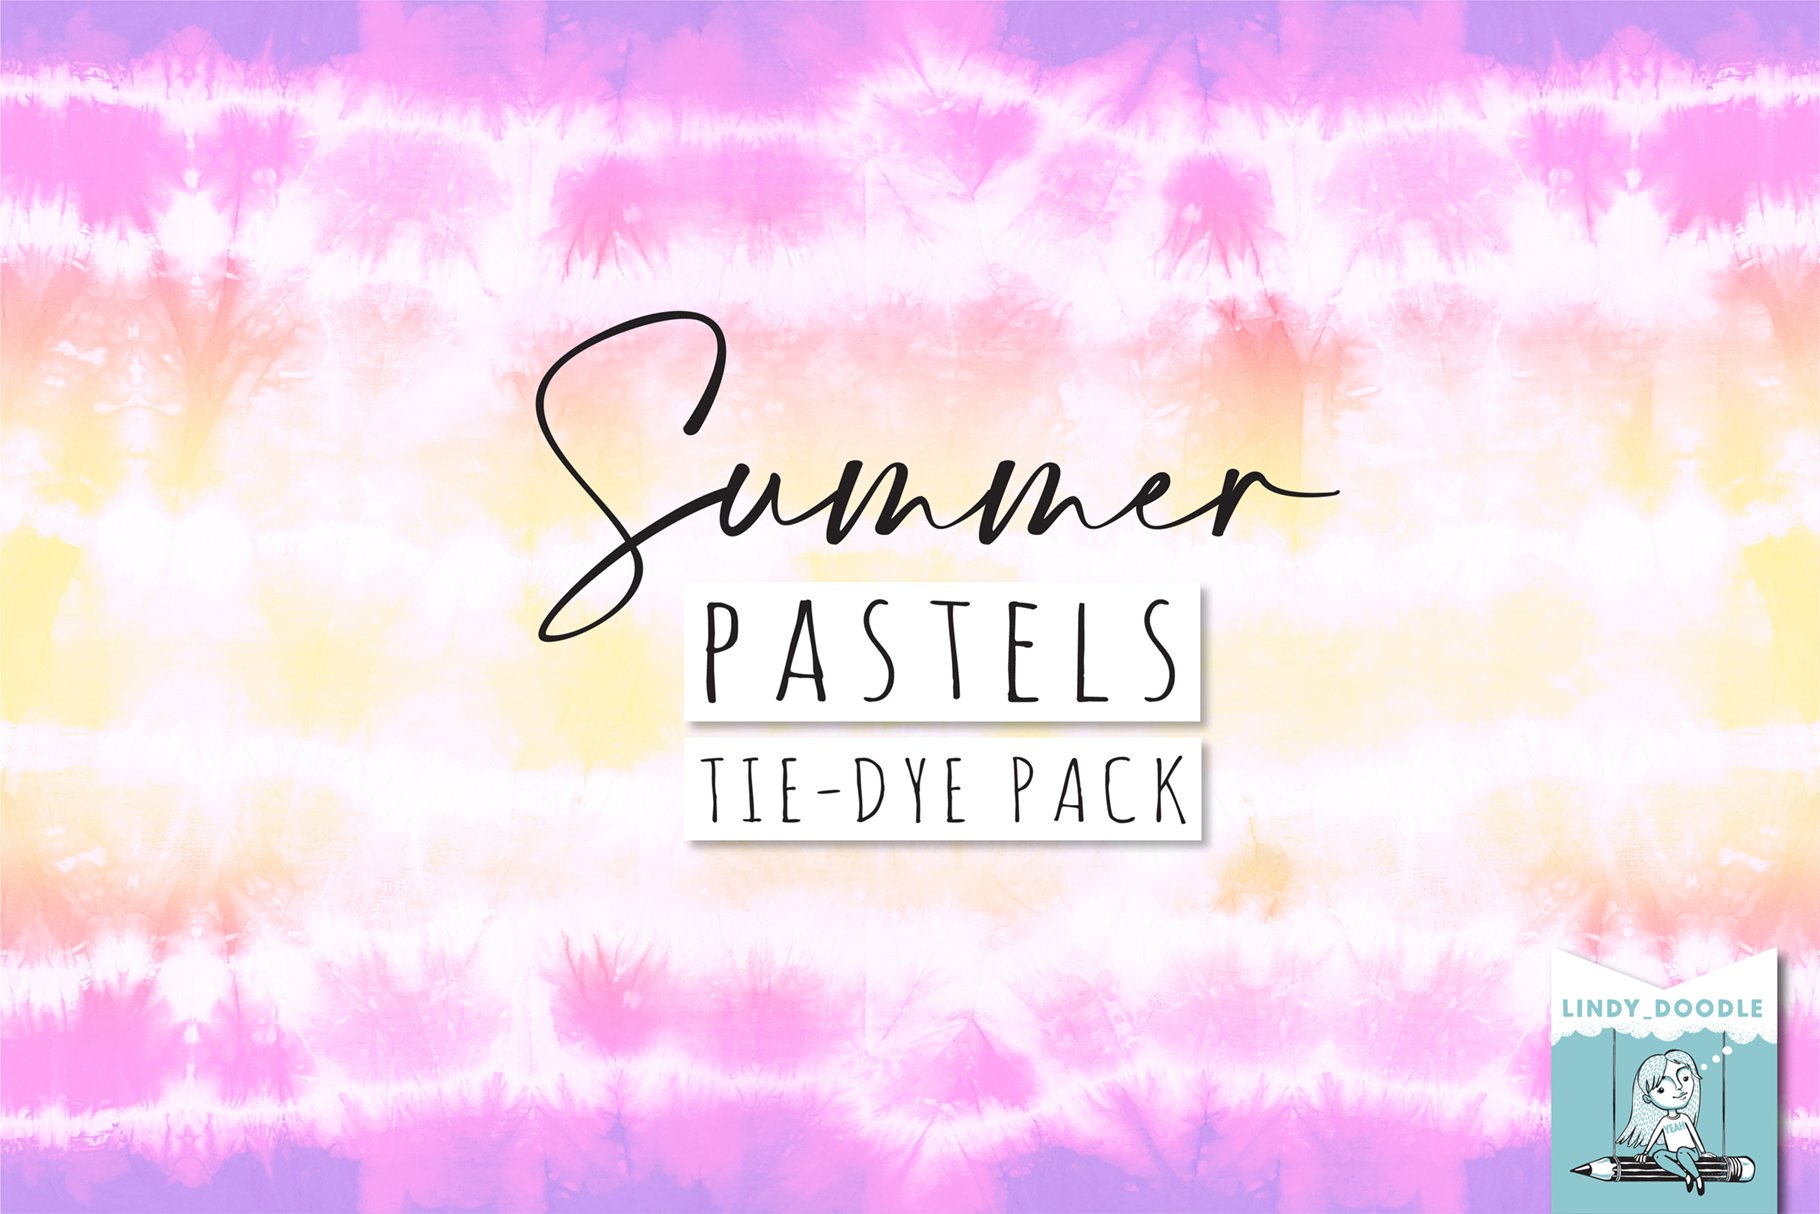 Summer Pastel Tie-Dye Patterns cover image.